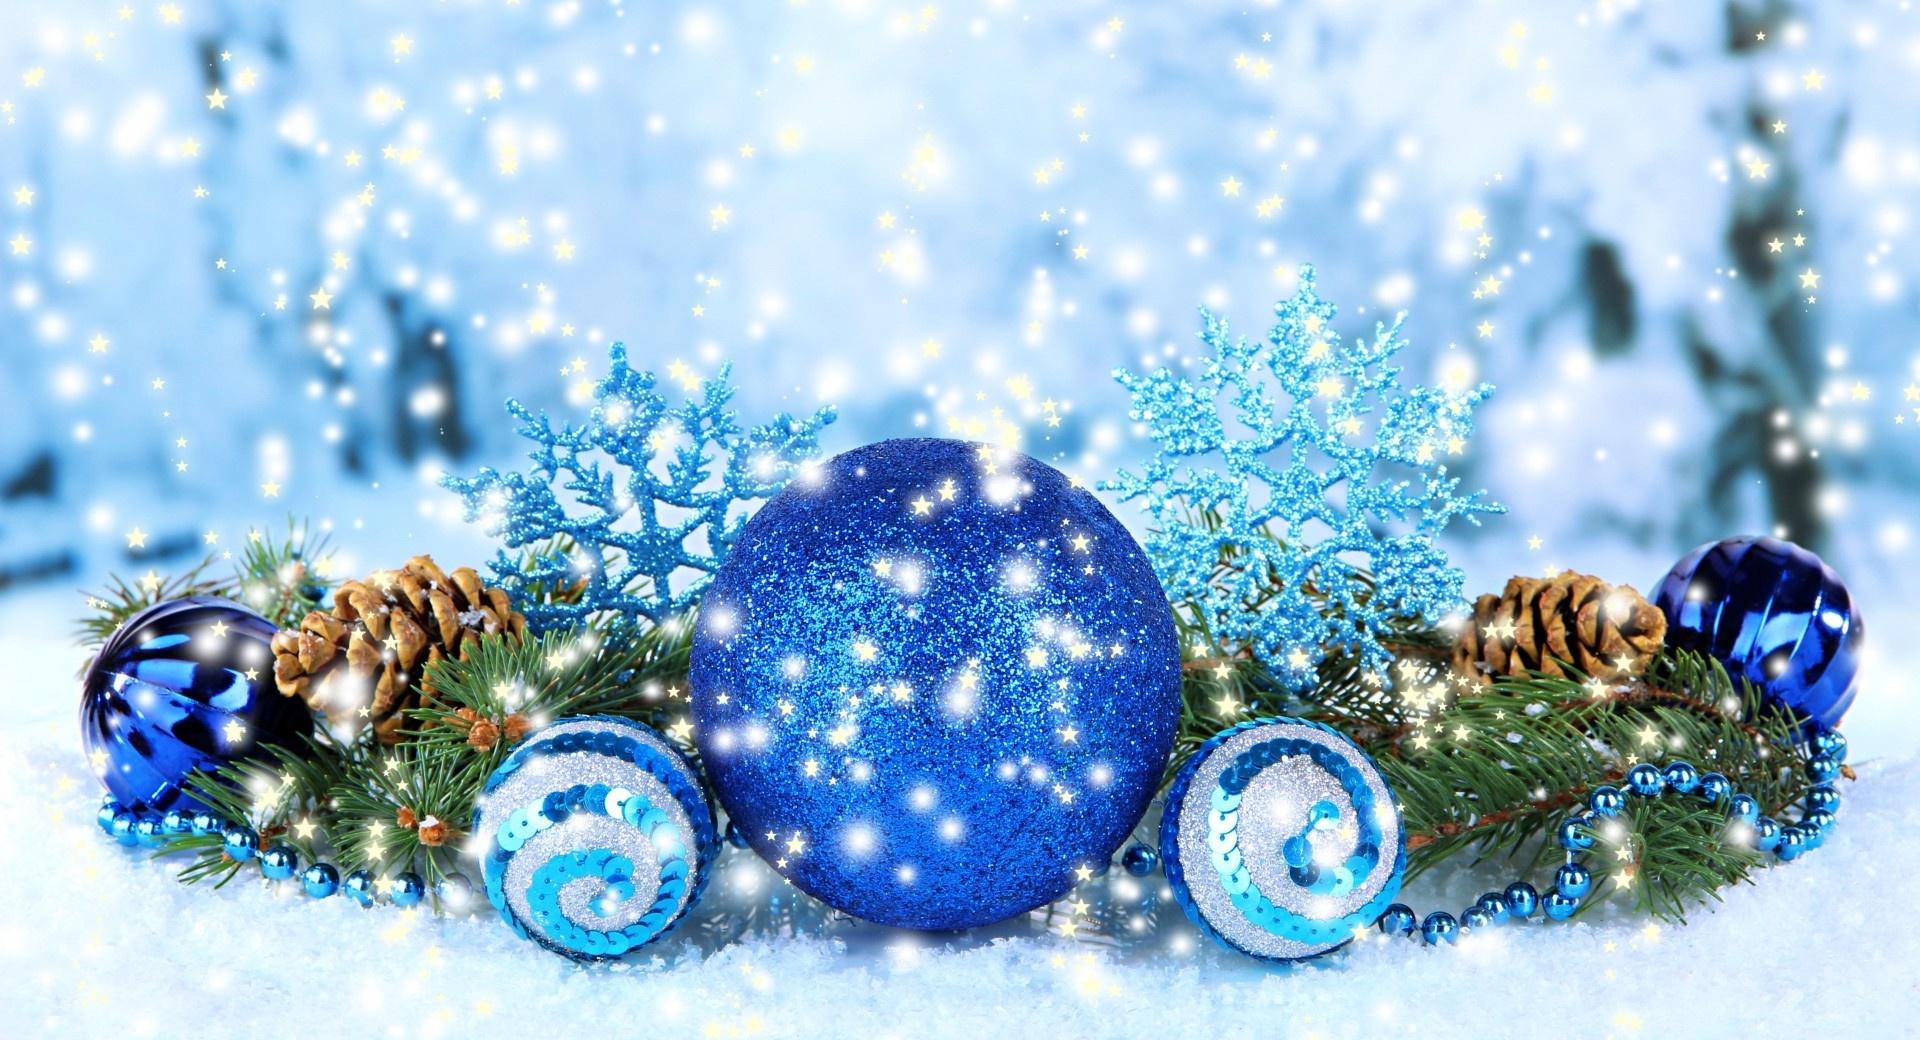 Blue Christmas Decorations 2016 wallpapers HD quality